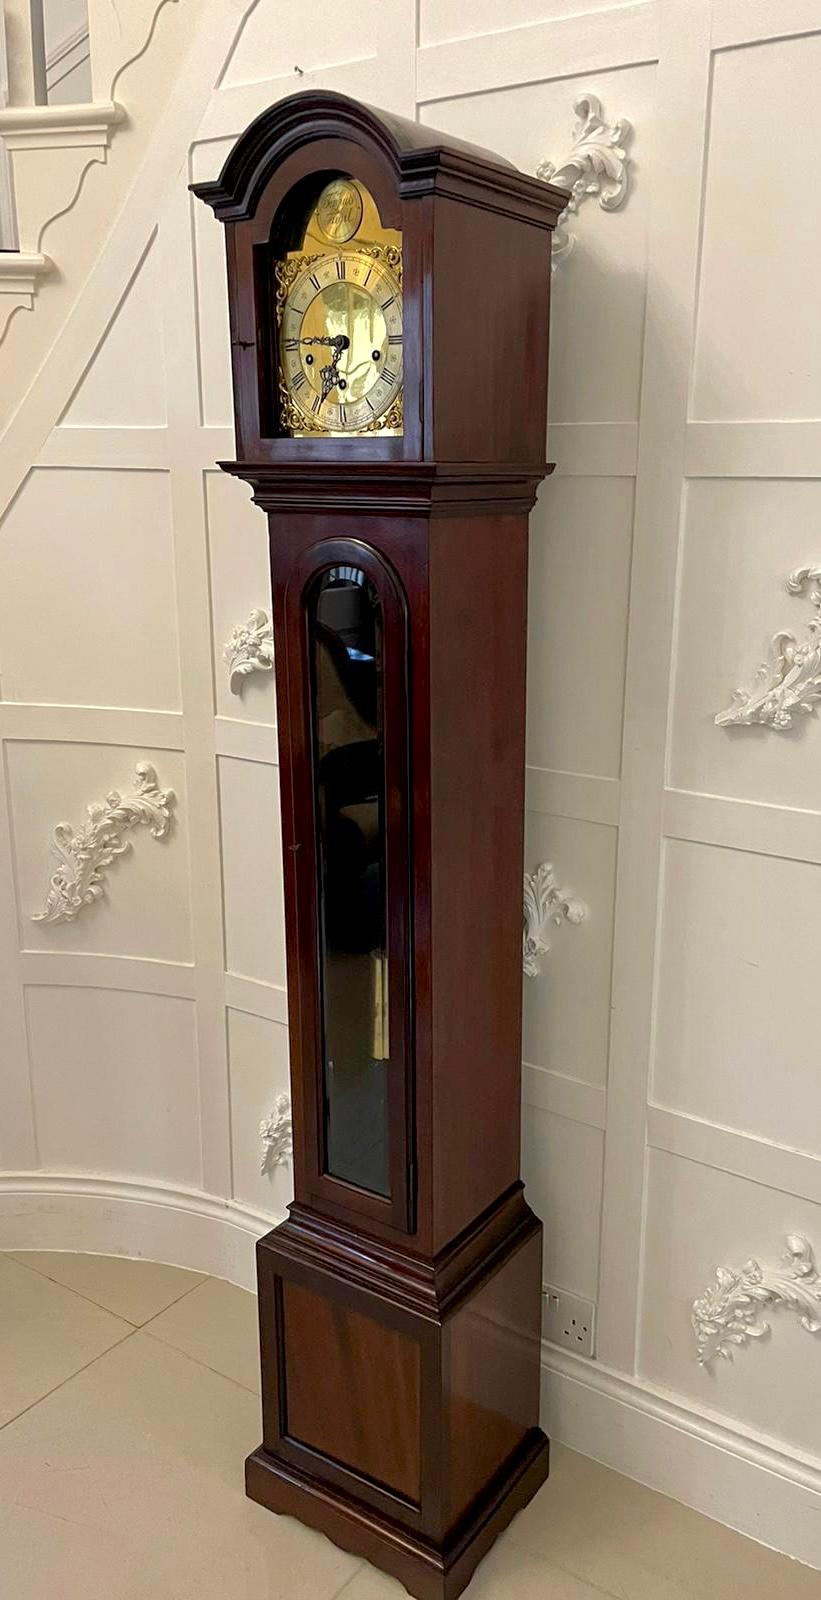 George III Outstanding Quality Antique Mahogany 8 Day Chiming Grandmother Clock 